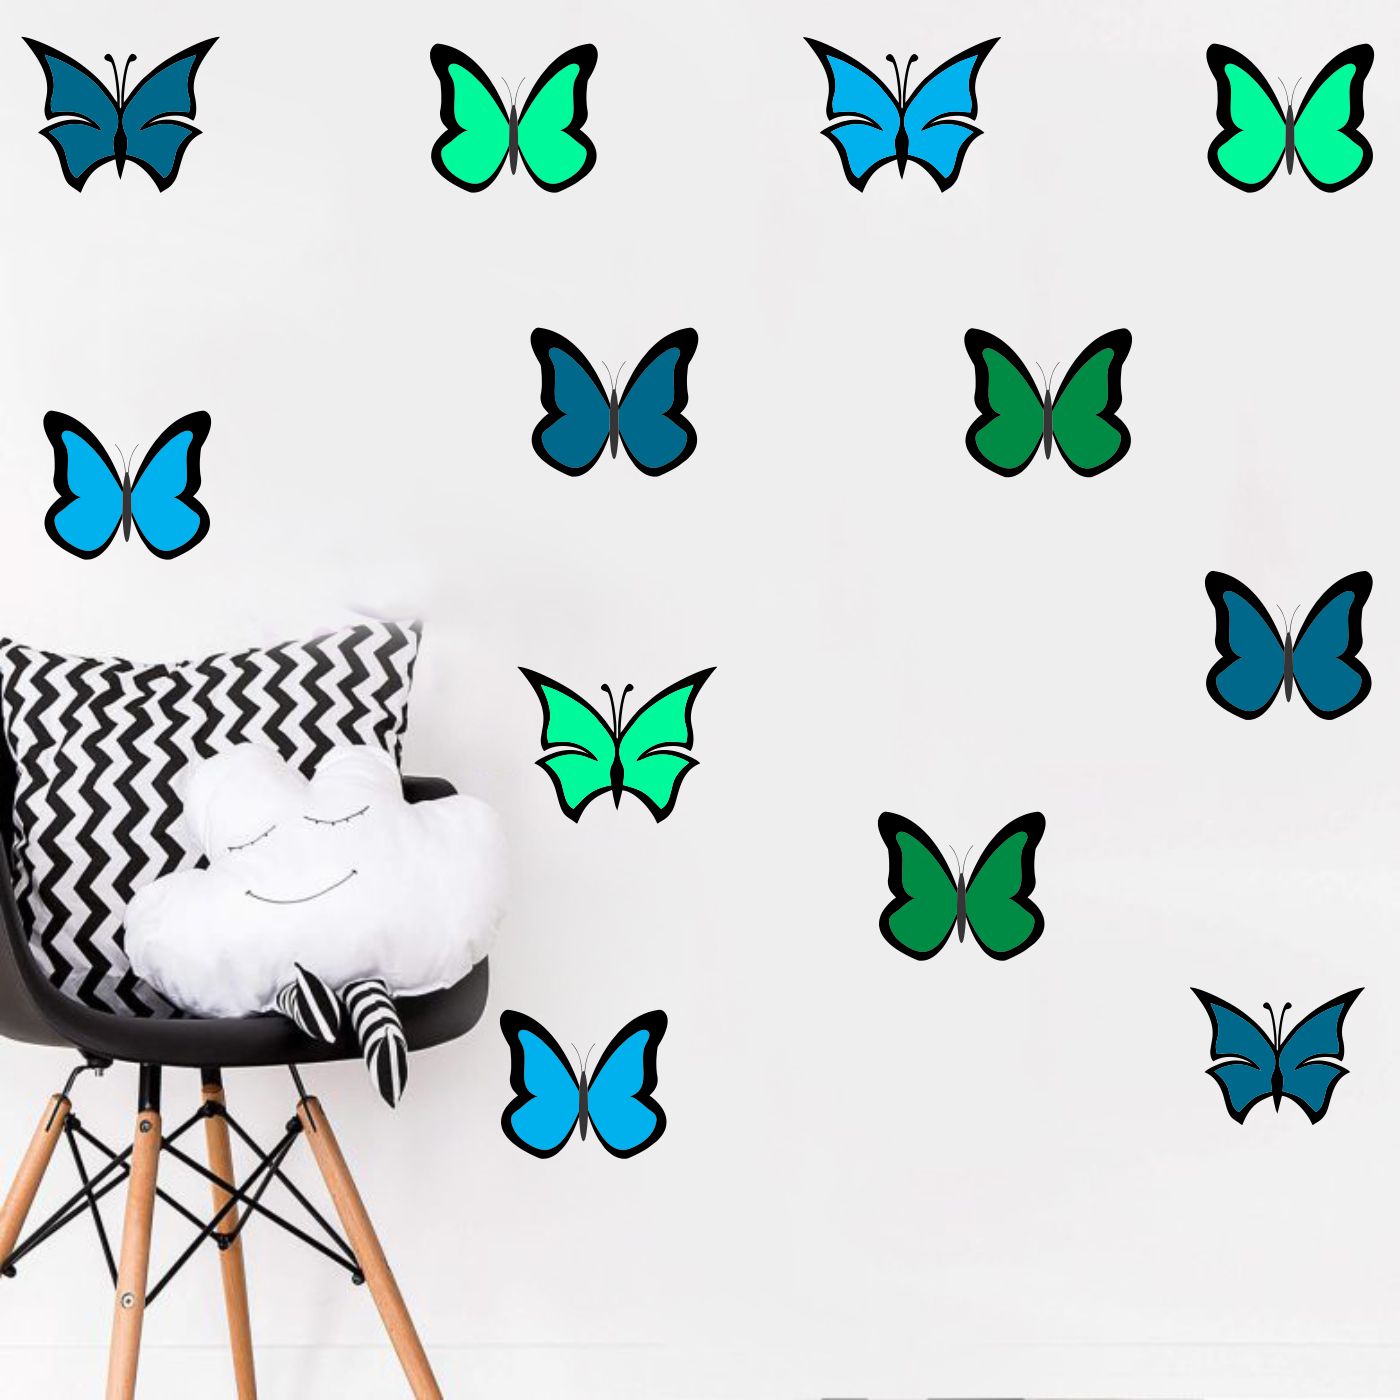 ORKA Butterfly Theme Wall Decal Sticker 28  